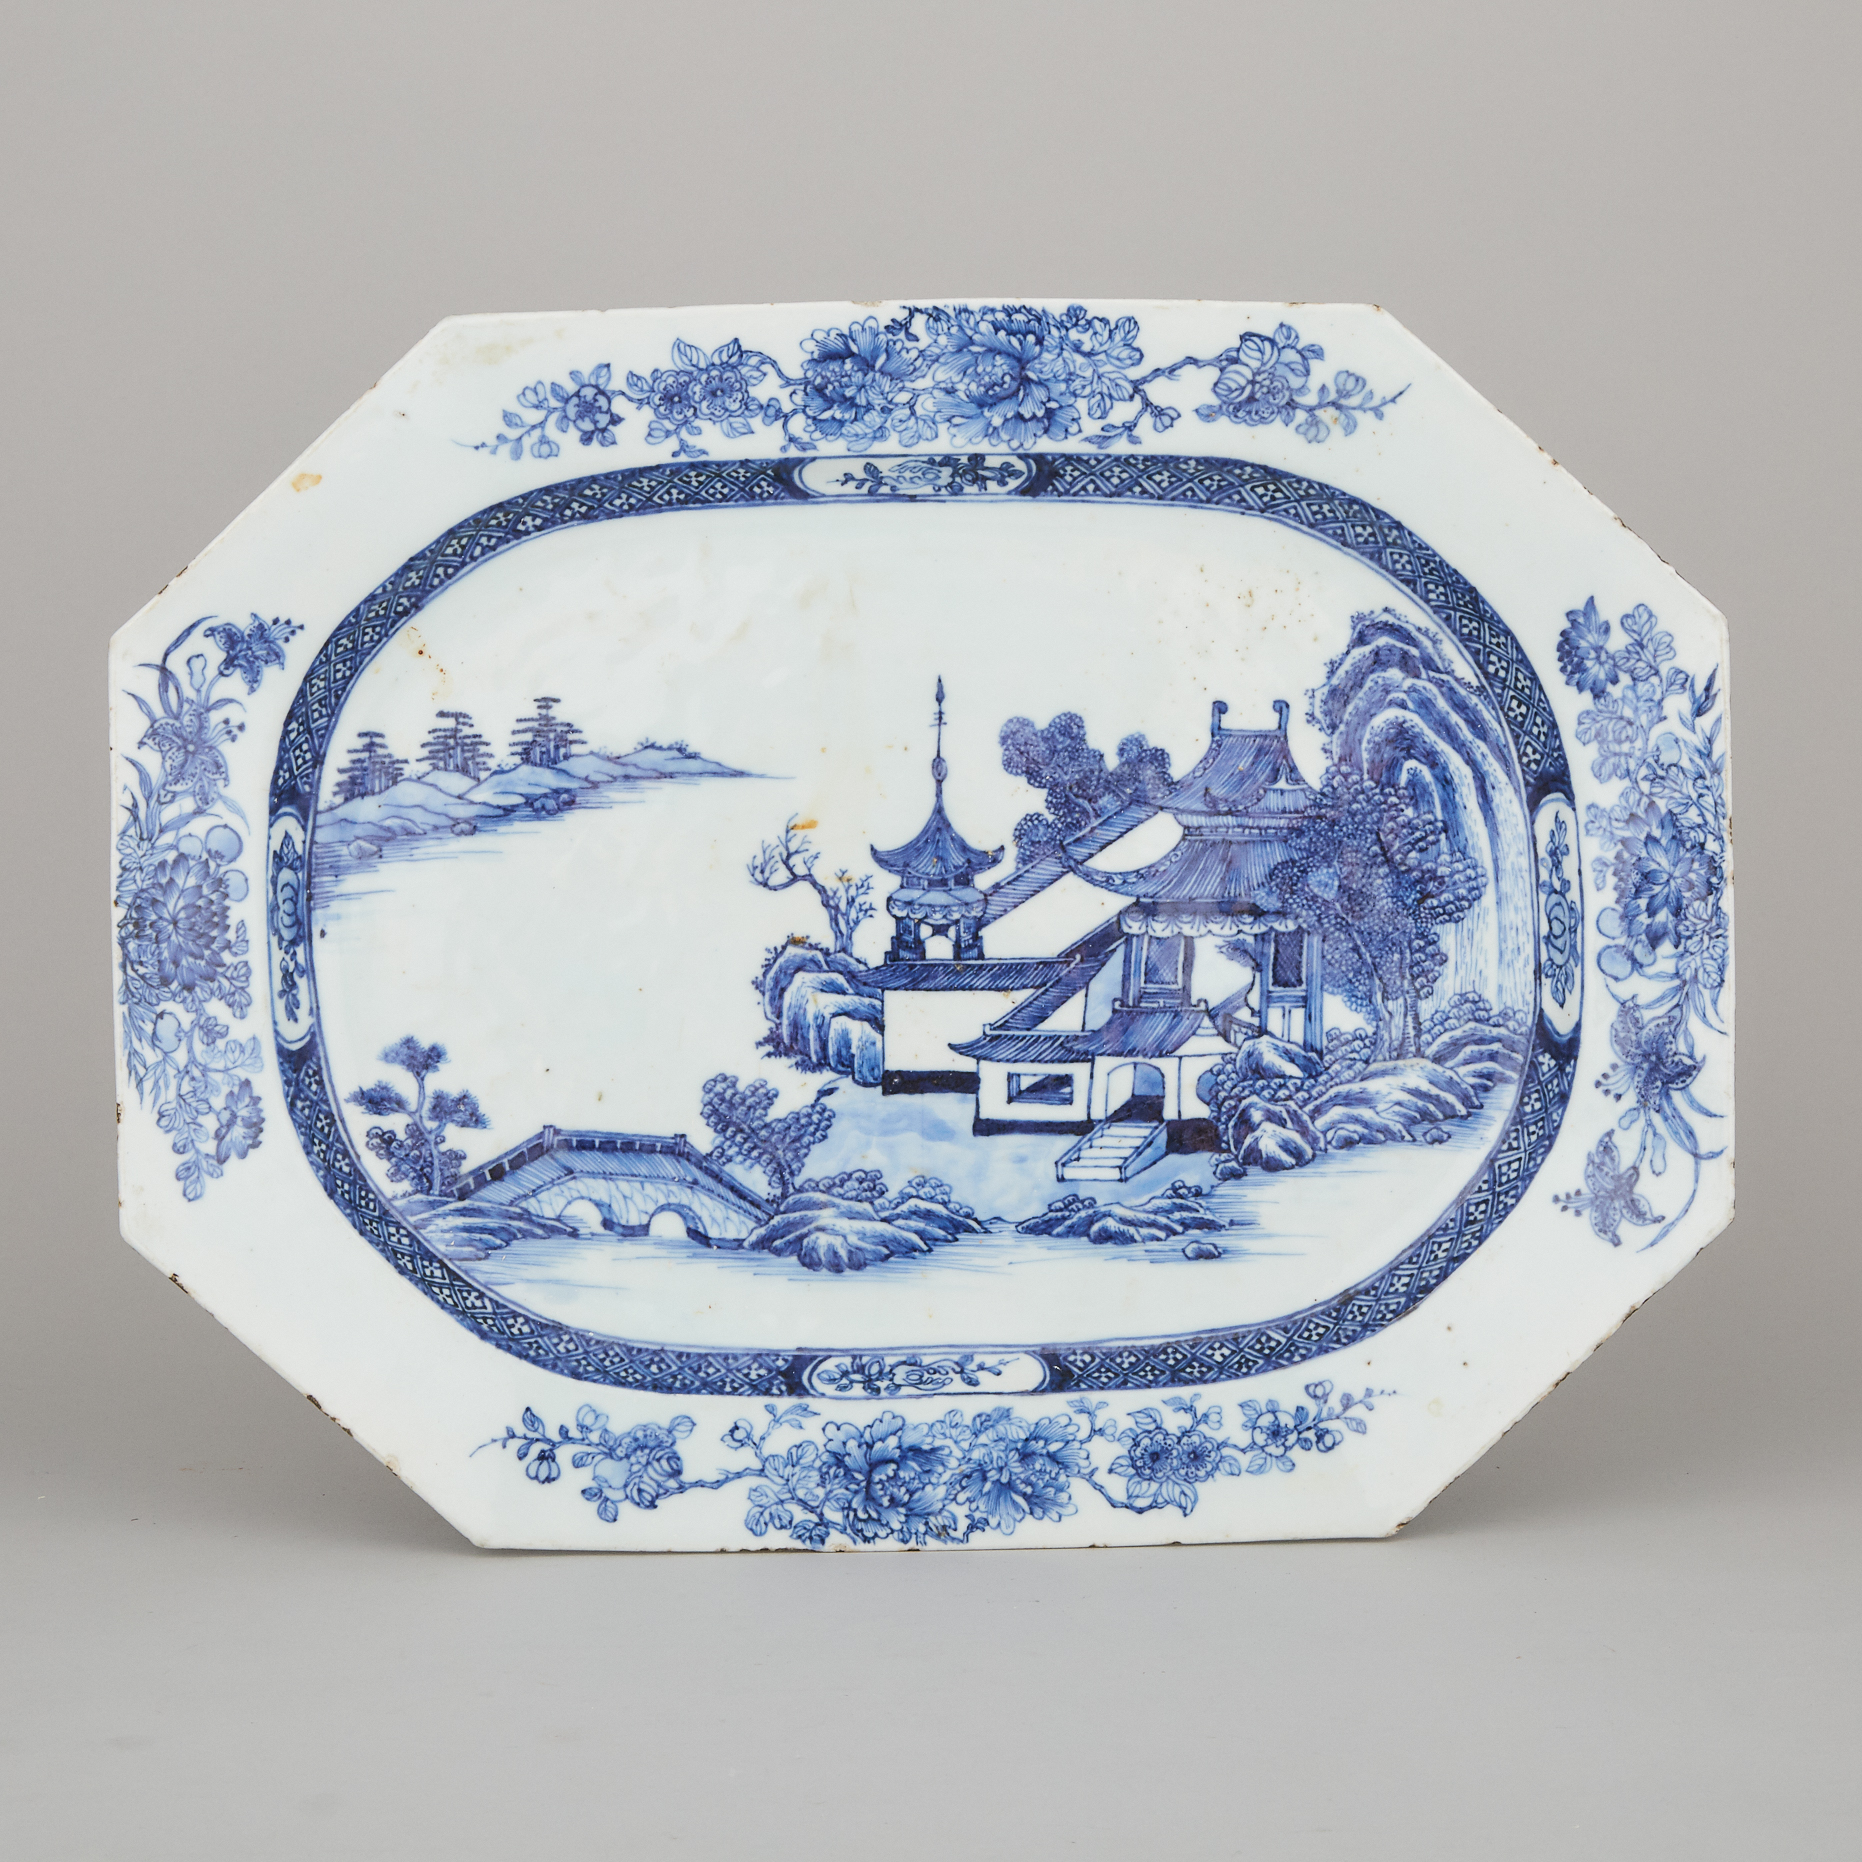 A Chinese Export Blue and White Platter, 18th Century